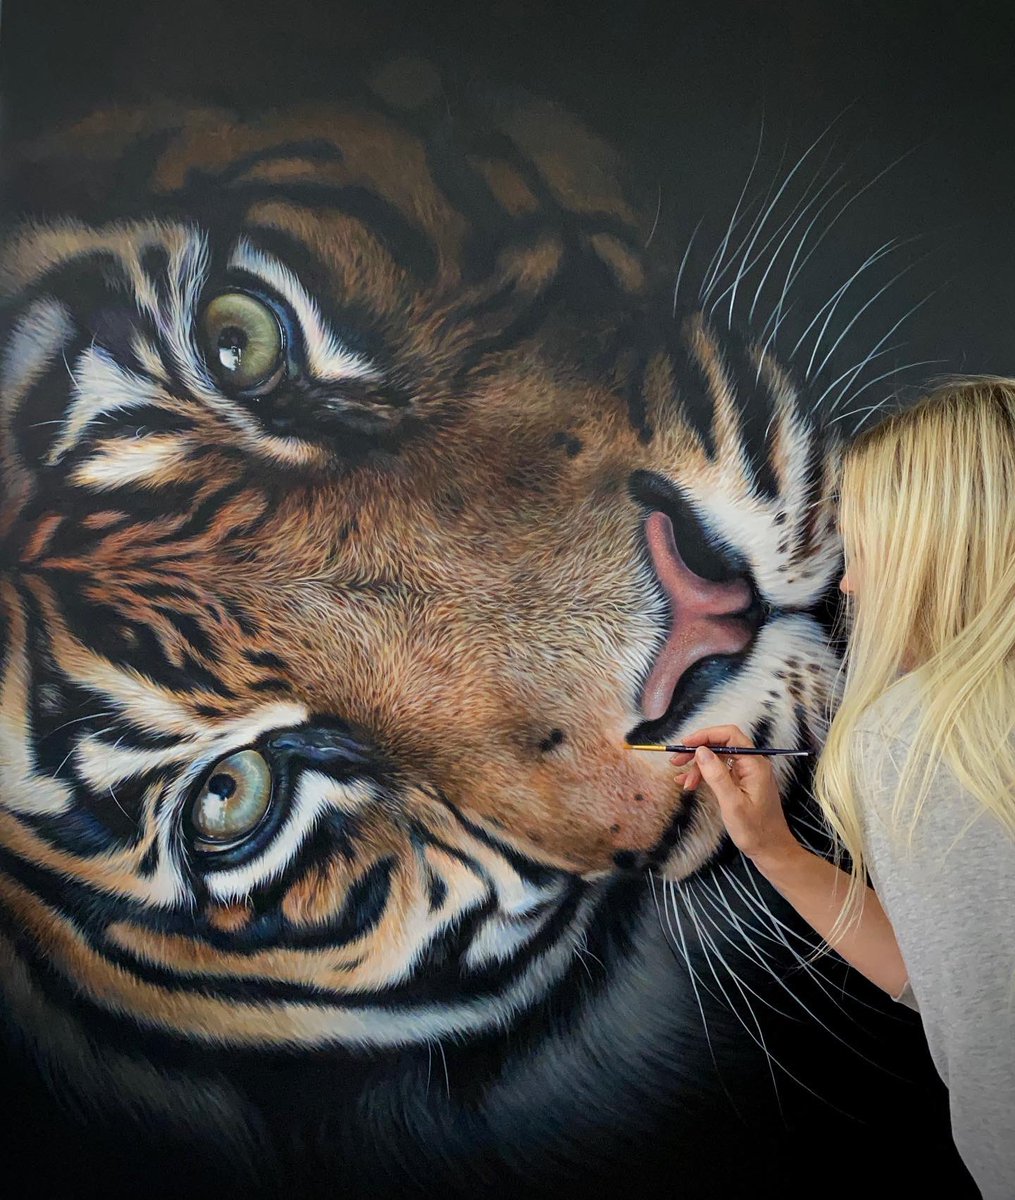 One of my big tiger commissions. I turned it on its side to paint the ‘hard to reach areas’…sometimes the easel won’t go high enough 😂 

julierhodes.com

#tigerart #tigerpainting #wildlifeartist #realism #arte #artistic #artstyle #paintings #endangeredspecies #bigcatart